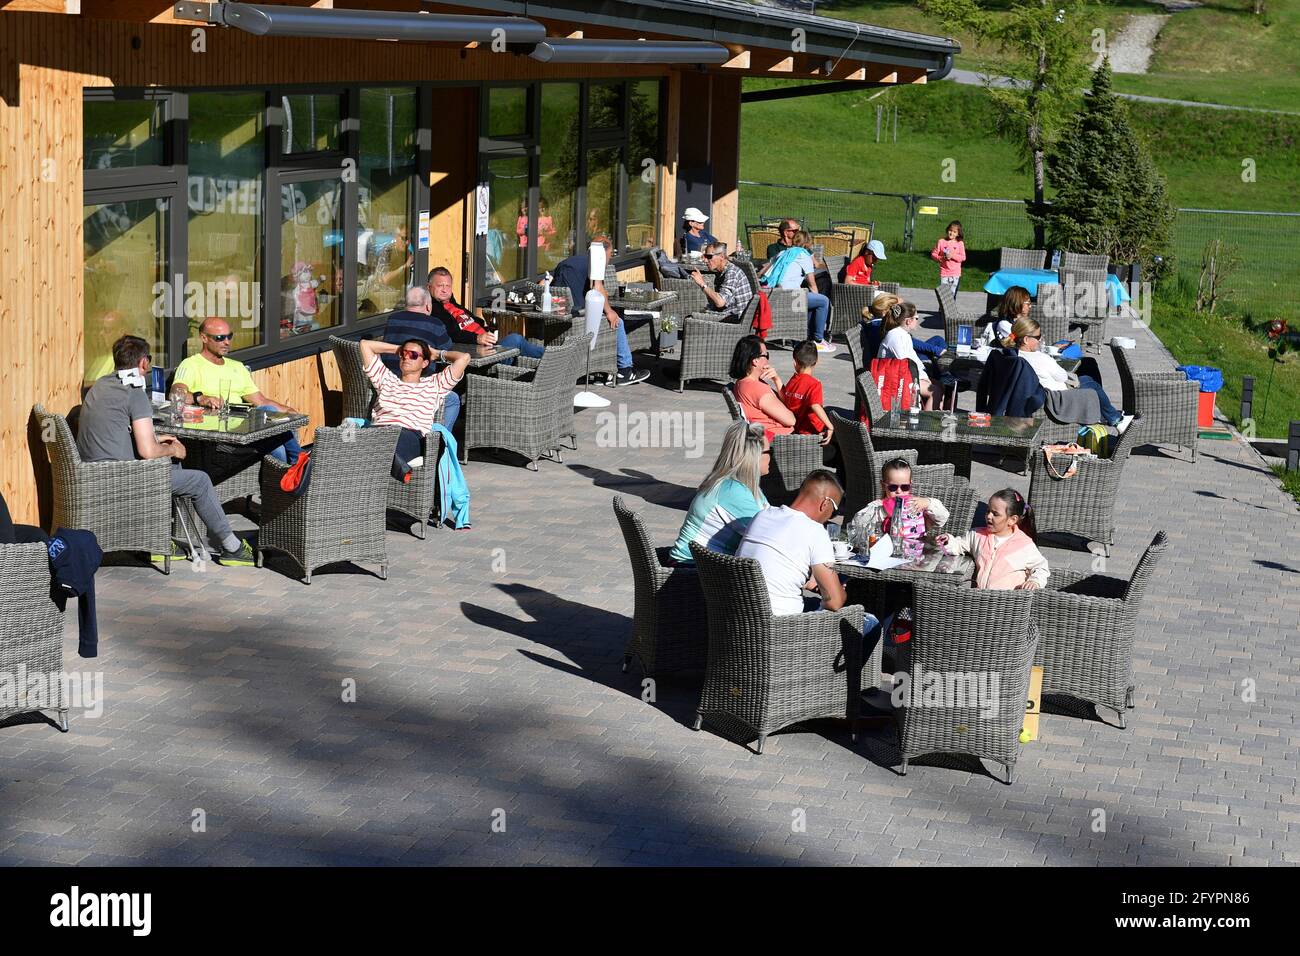 Opening of outdoor catering, relaxation and regaining of old freedoms after falling incidence. Guests of a restaurant sit outside on lounge furniture in the sun. Stock Photo